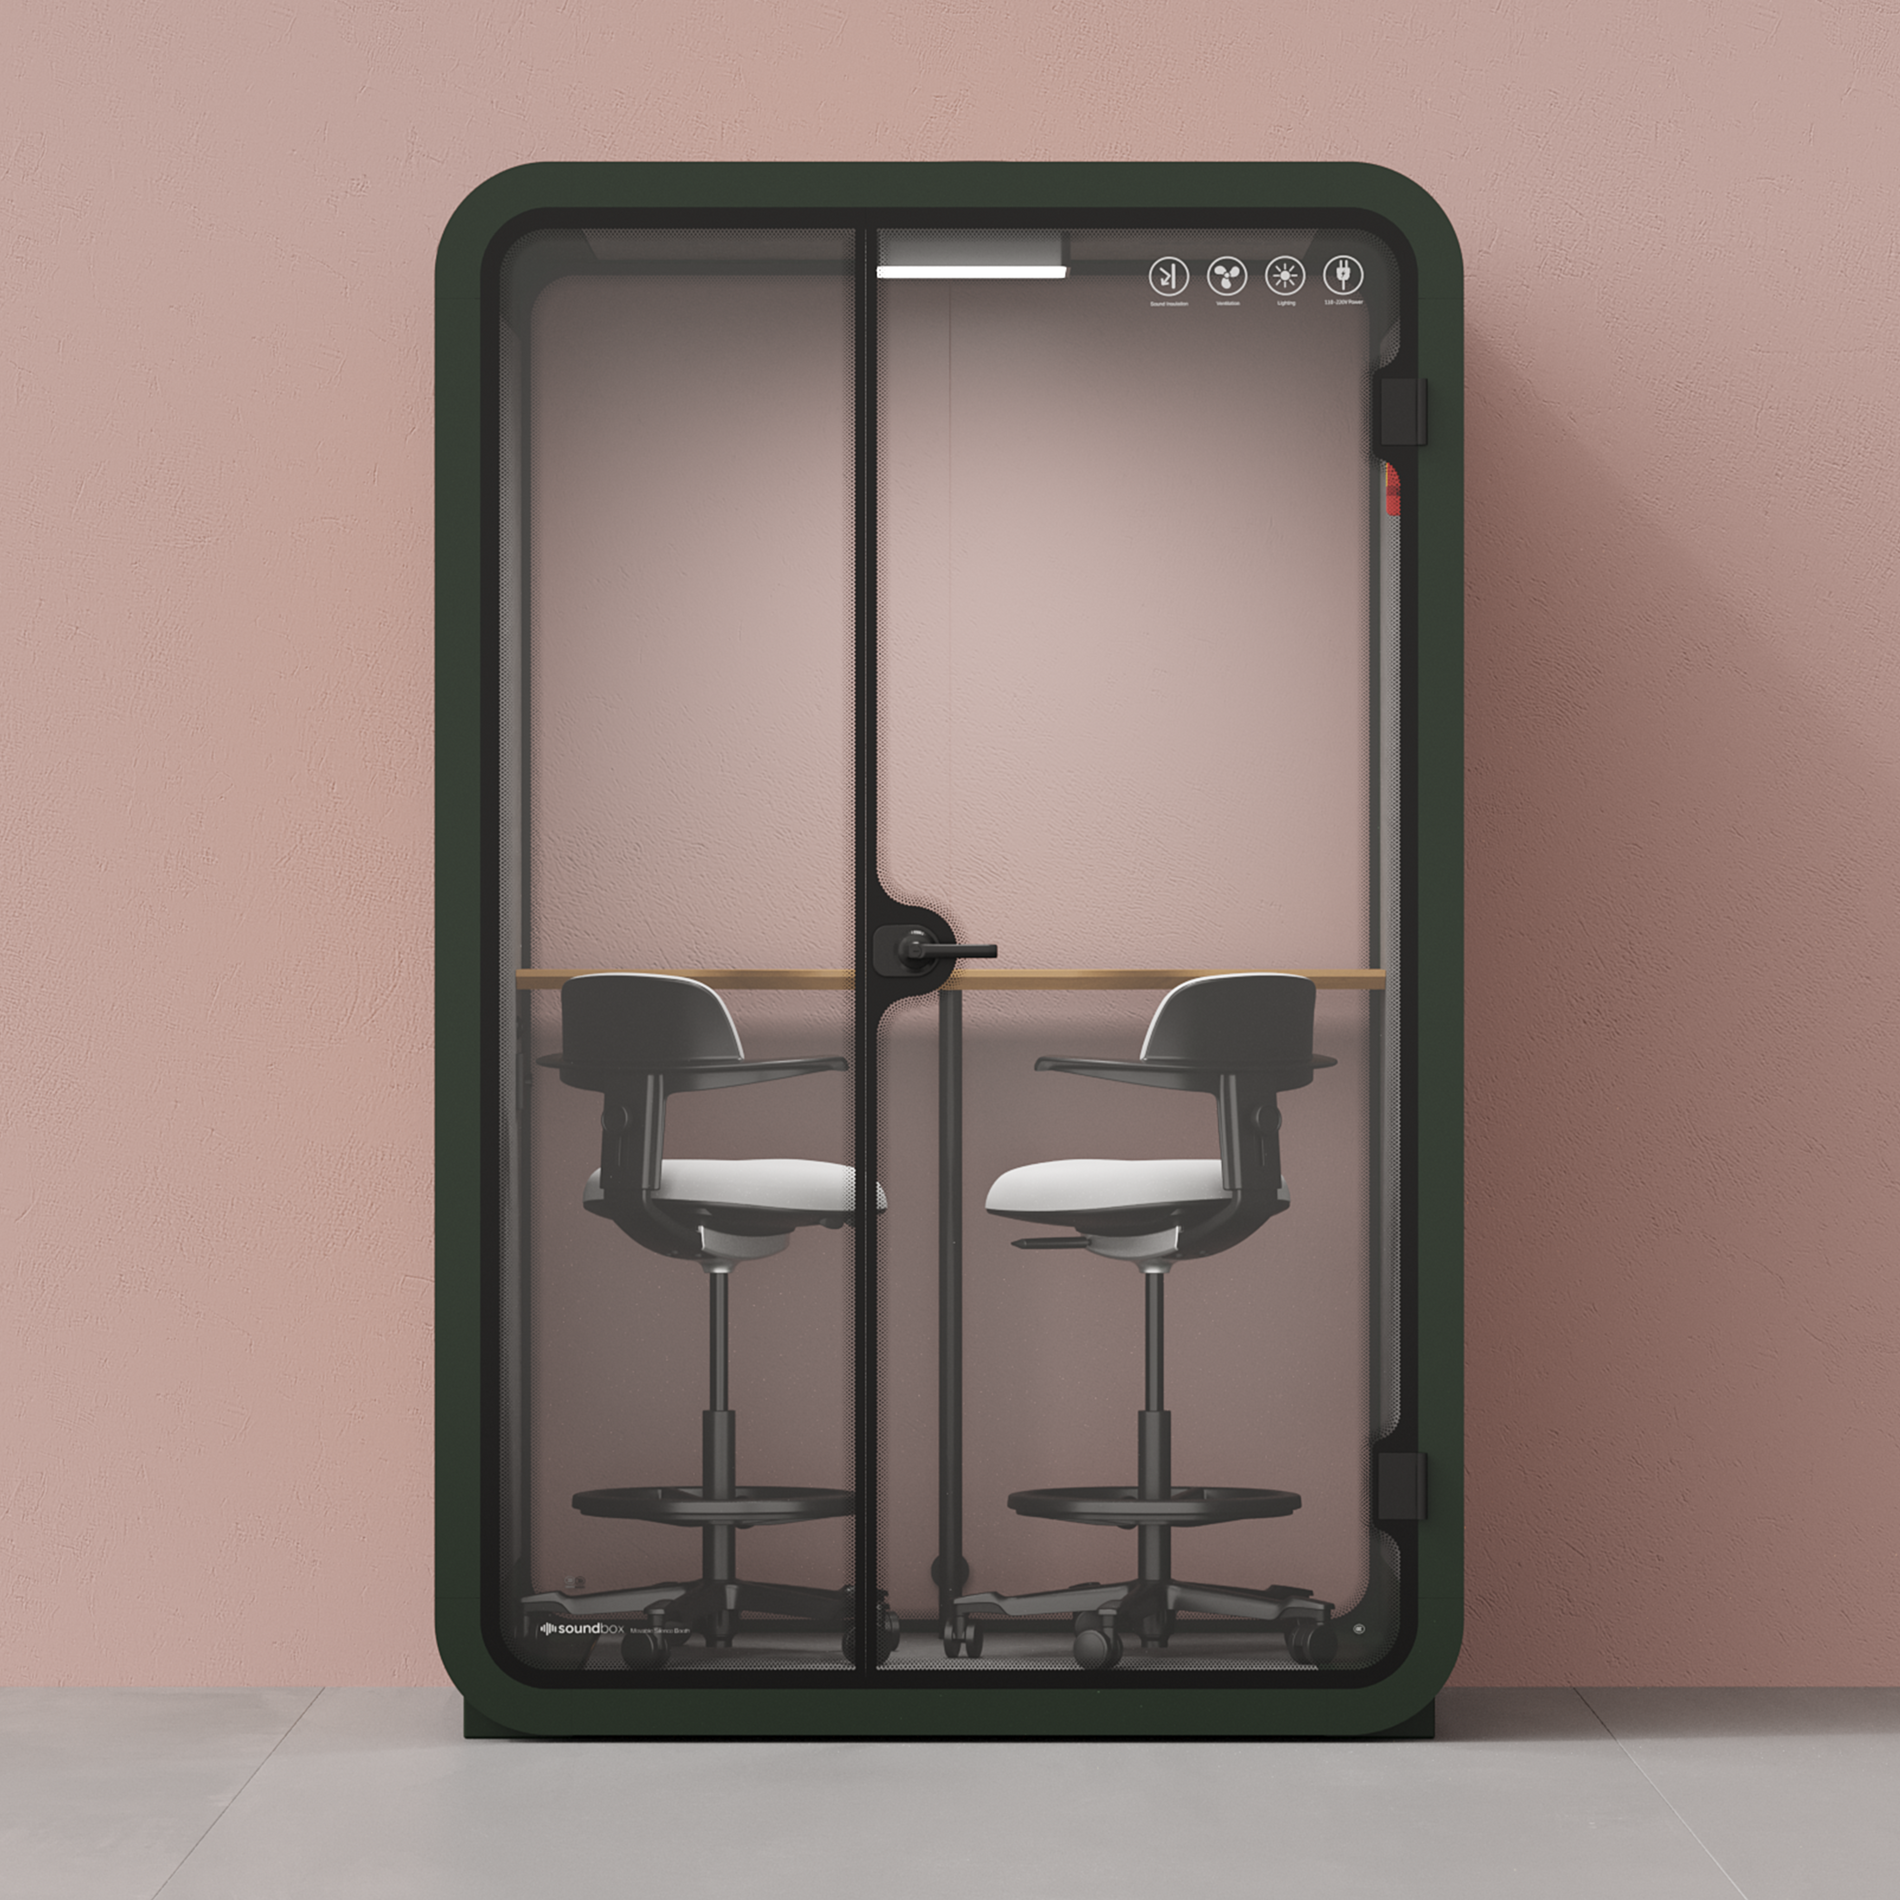 Quell - Office Pod - 2 PersonGreen / Dark Gray / Dual Zoom Room + Device Shelf + 2 Barstools